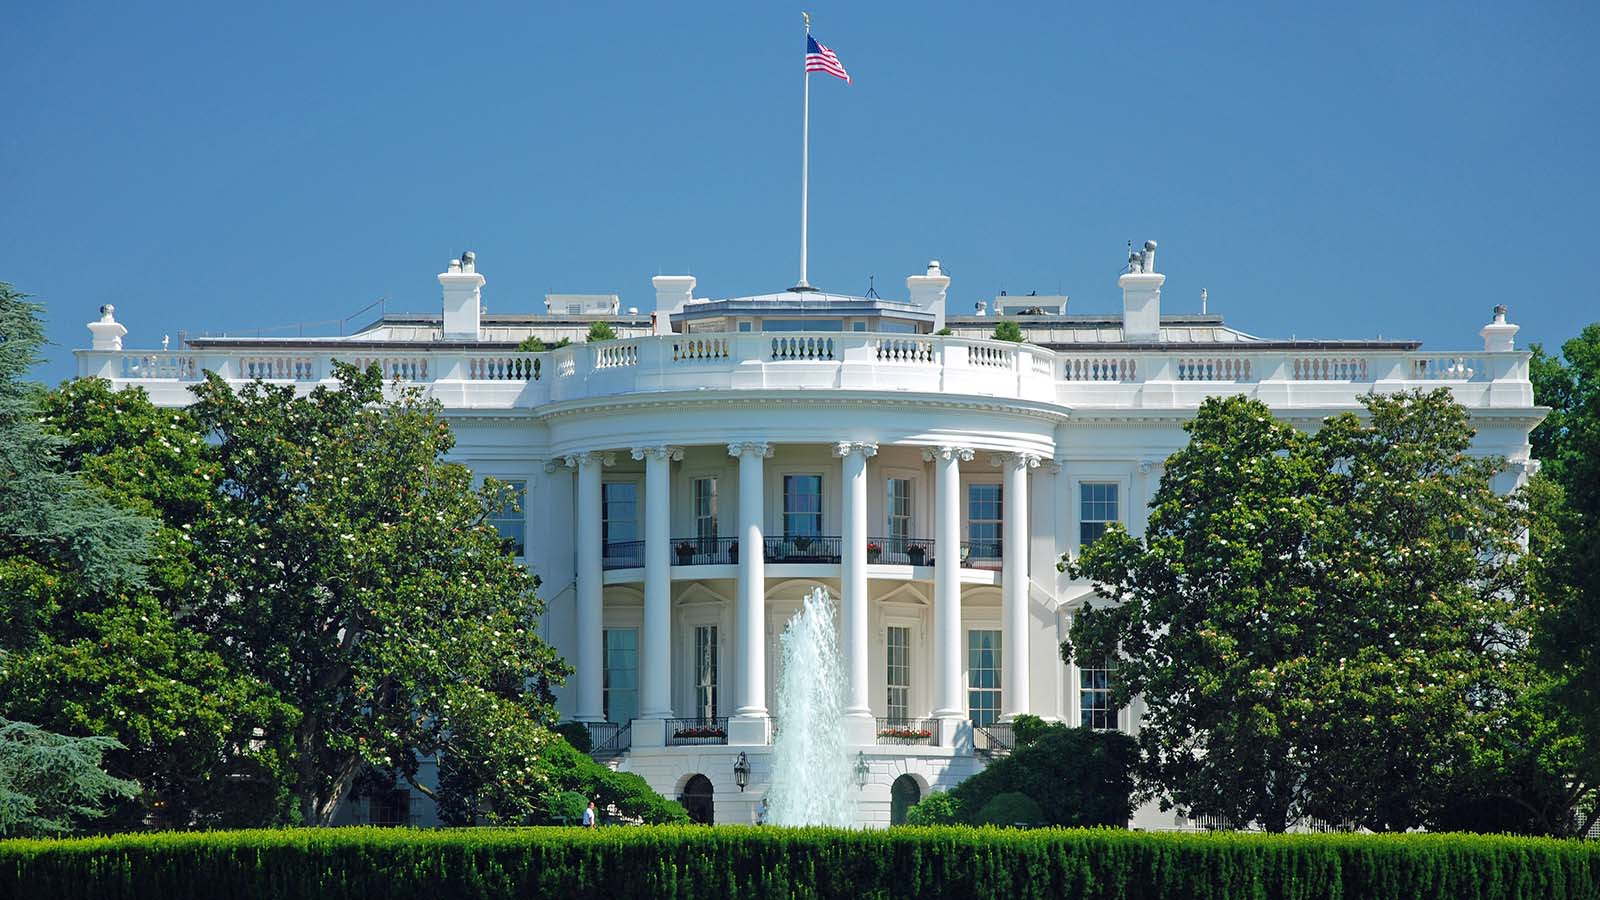 History Majors Will Find This Quiz Easy but Will You? White House, Washington, D.C., United States